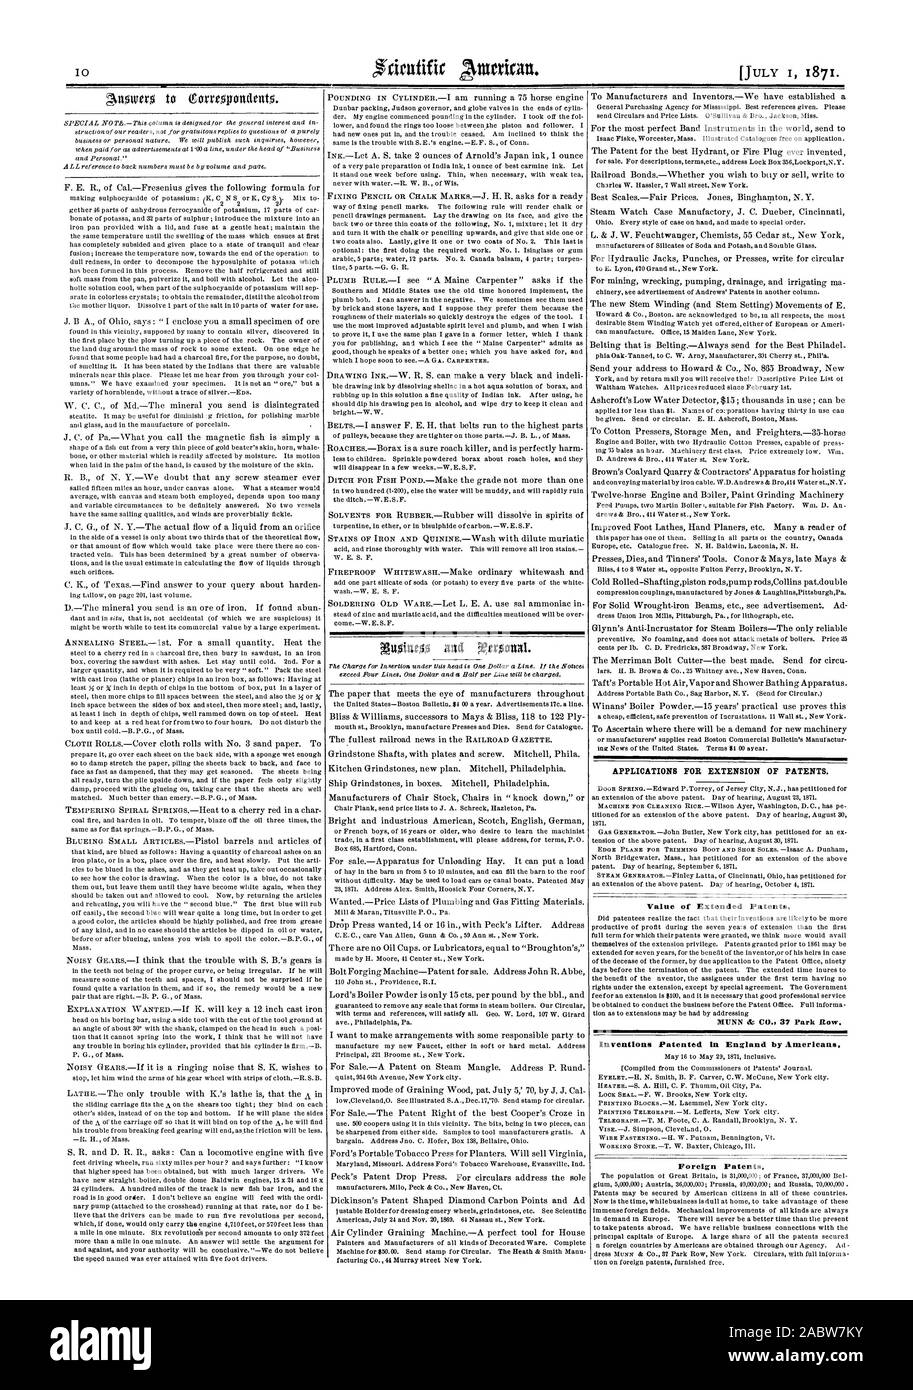 APPLICATIONS FOR EXTENSION OF PATENTS. Value of Extended Patents. MUNN & CO. 3V Park Raw. Inventions Patented in England by Americans. Foreign Patents., scientific american, 1871-07-01 Stock Photo